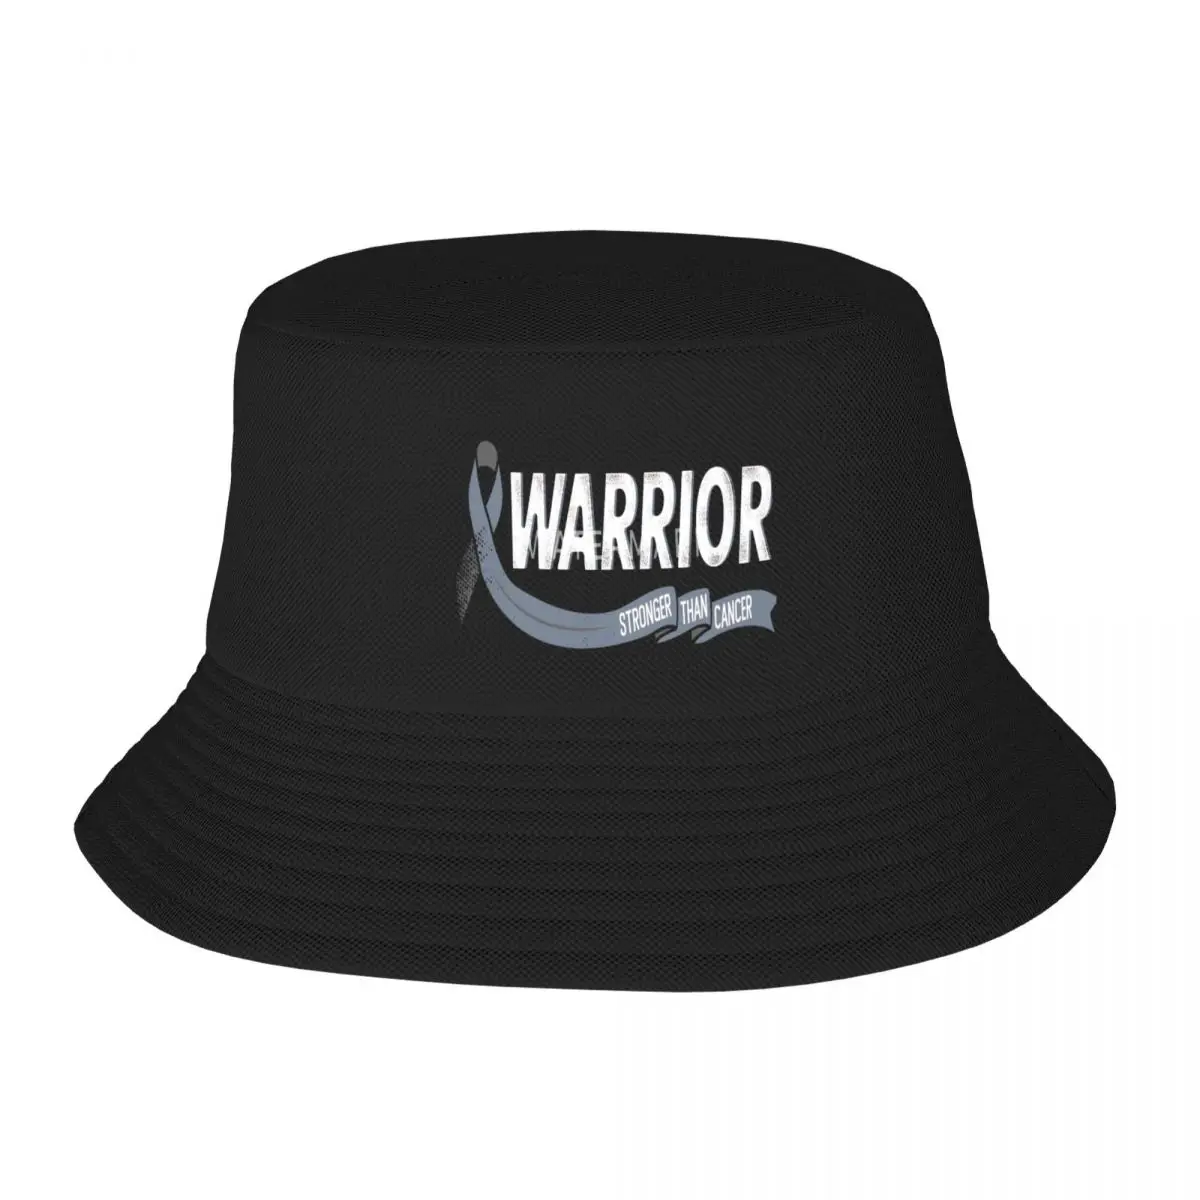 

Warrior Stronger Than Cancer Brain Cancer Fisherman's Hat, Adult Cap Modern Soft For Daily Nice Gift